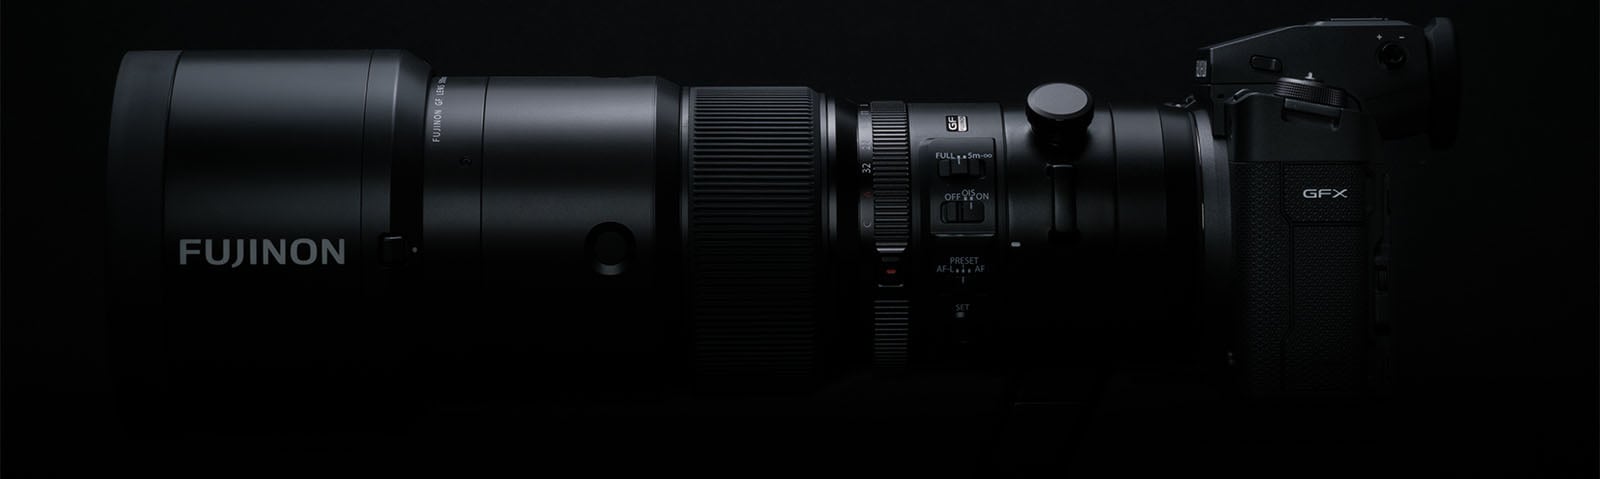 A close-up side view of a Fujifilm GFX camera equipped with a large Fujinon lens. The camera and lens are set against a black background, highlighting the details and controls on the lens and body. The image emphasizes the professional and sleek design of the equipment.